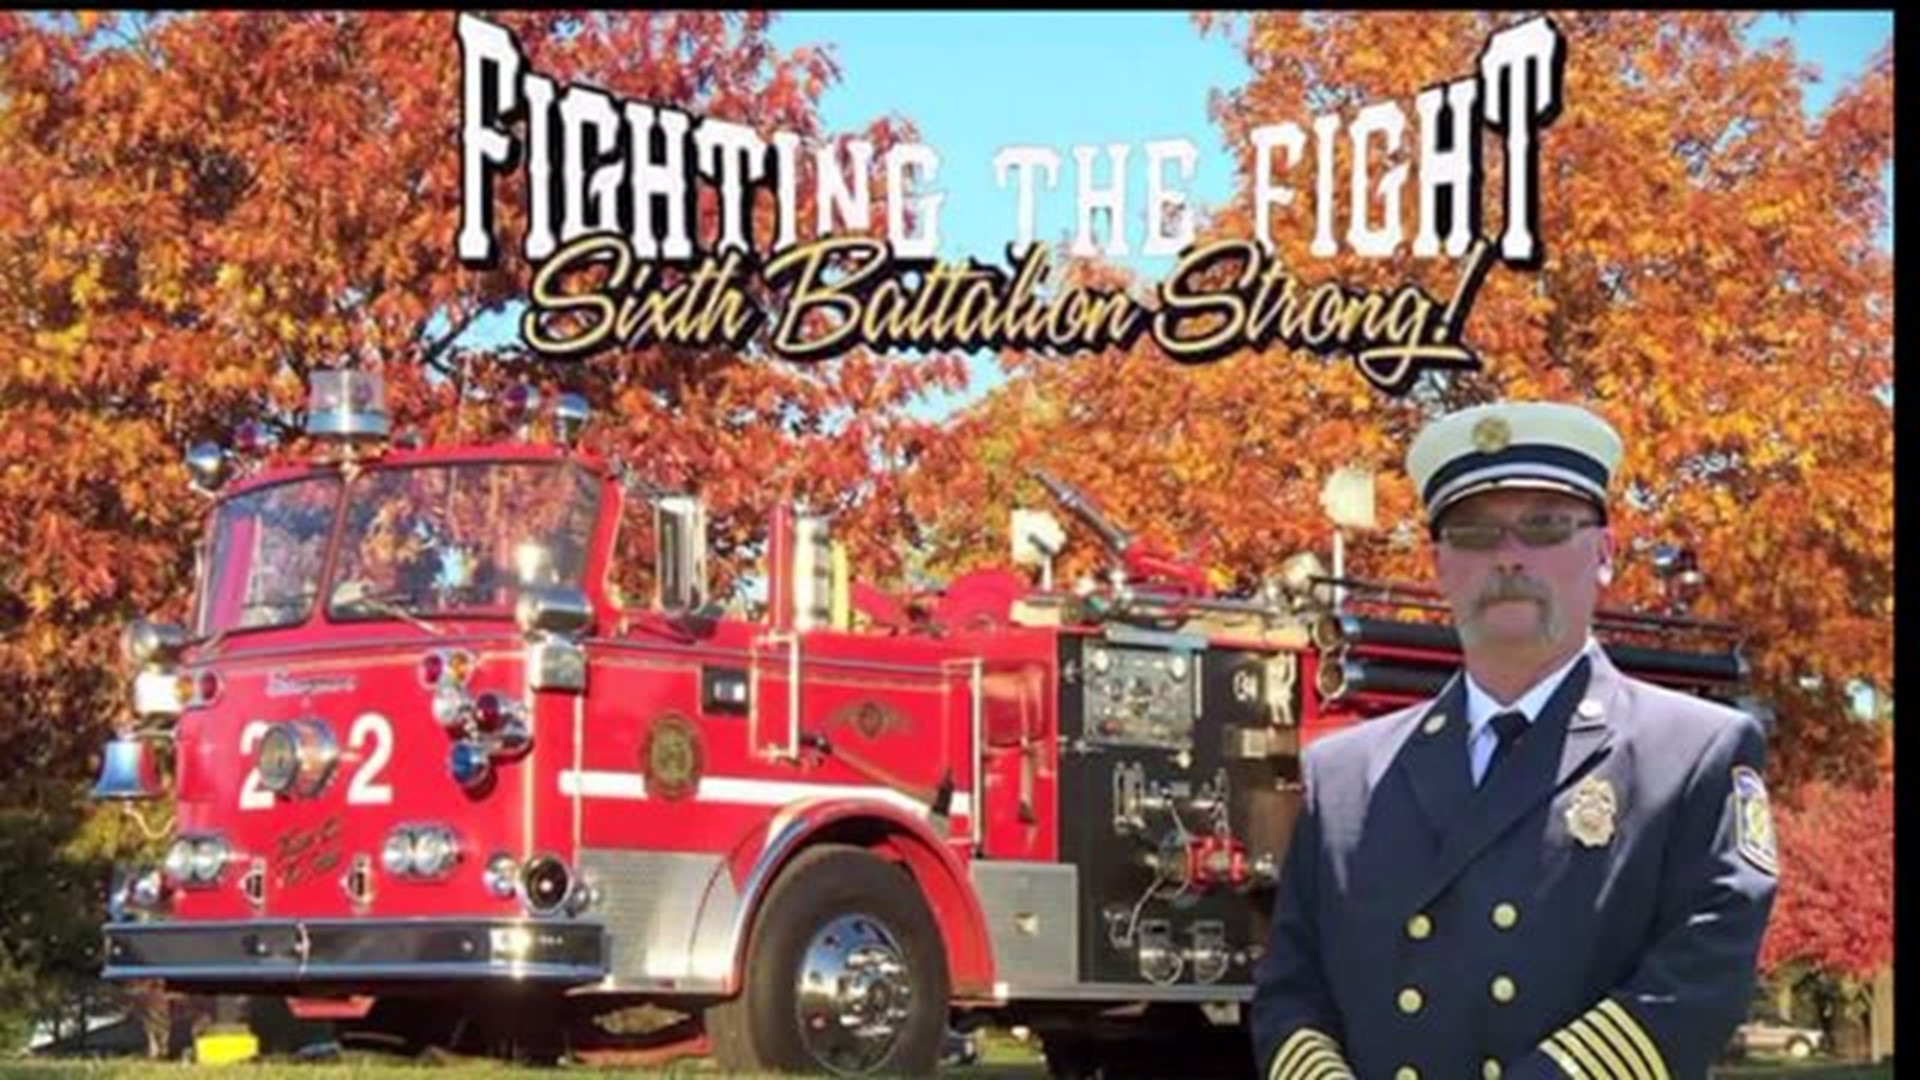 Cumberland county man fighting fires and fighting cancer